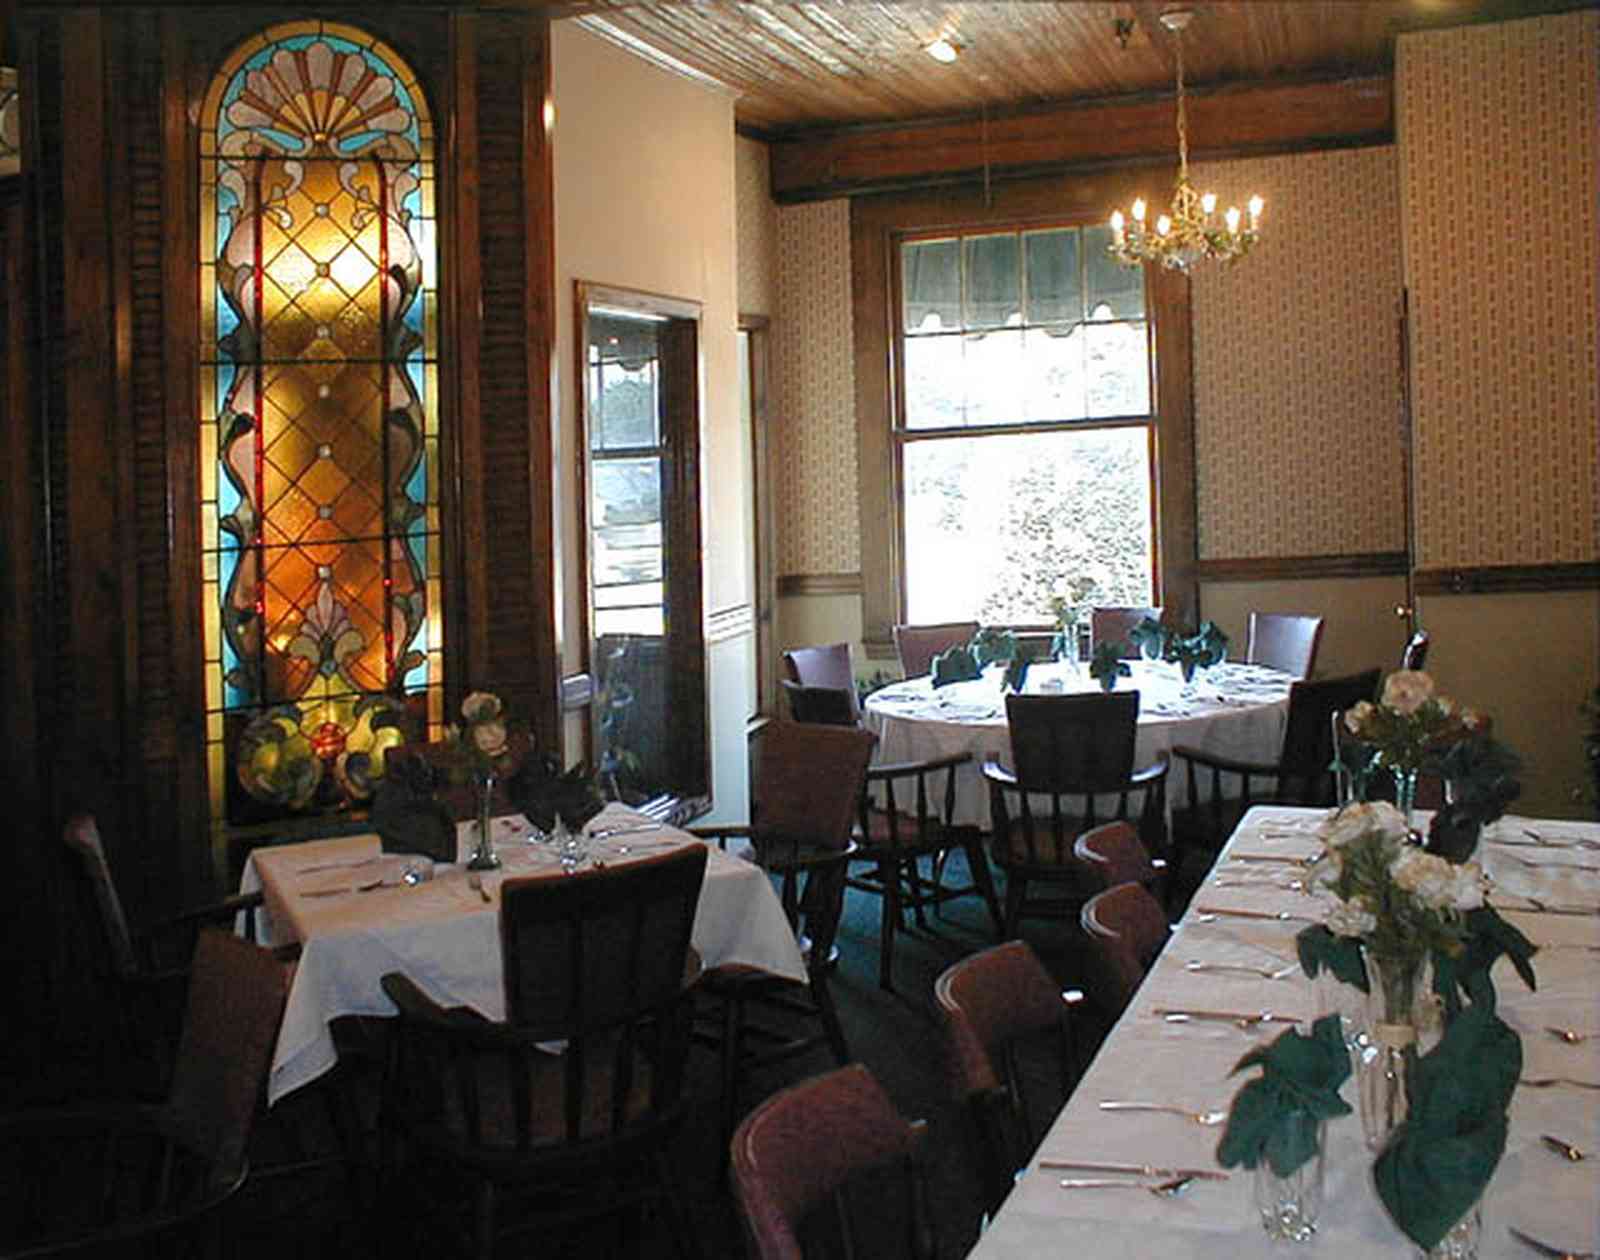 Foley:-The-Gift-Horse-Restaurant_02.jpg:  brass chandelier, beaded pine walls, buffet table, banquet table, silver compote, stained glass windows, table linen, restaurant